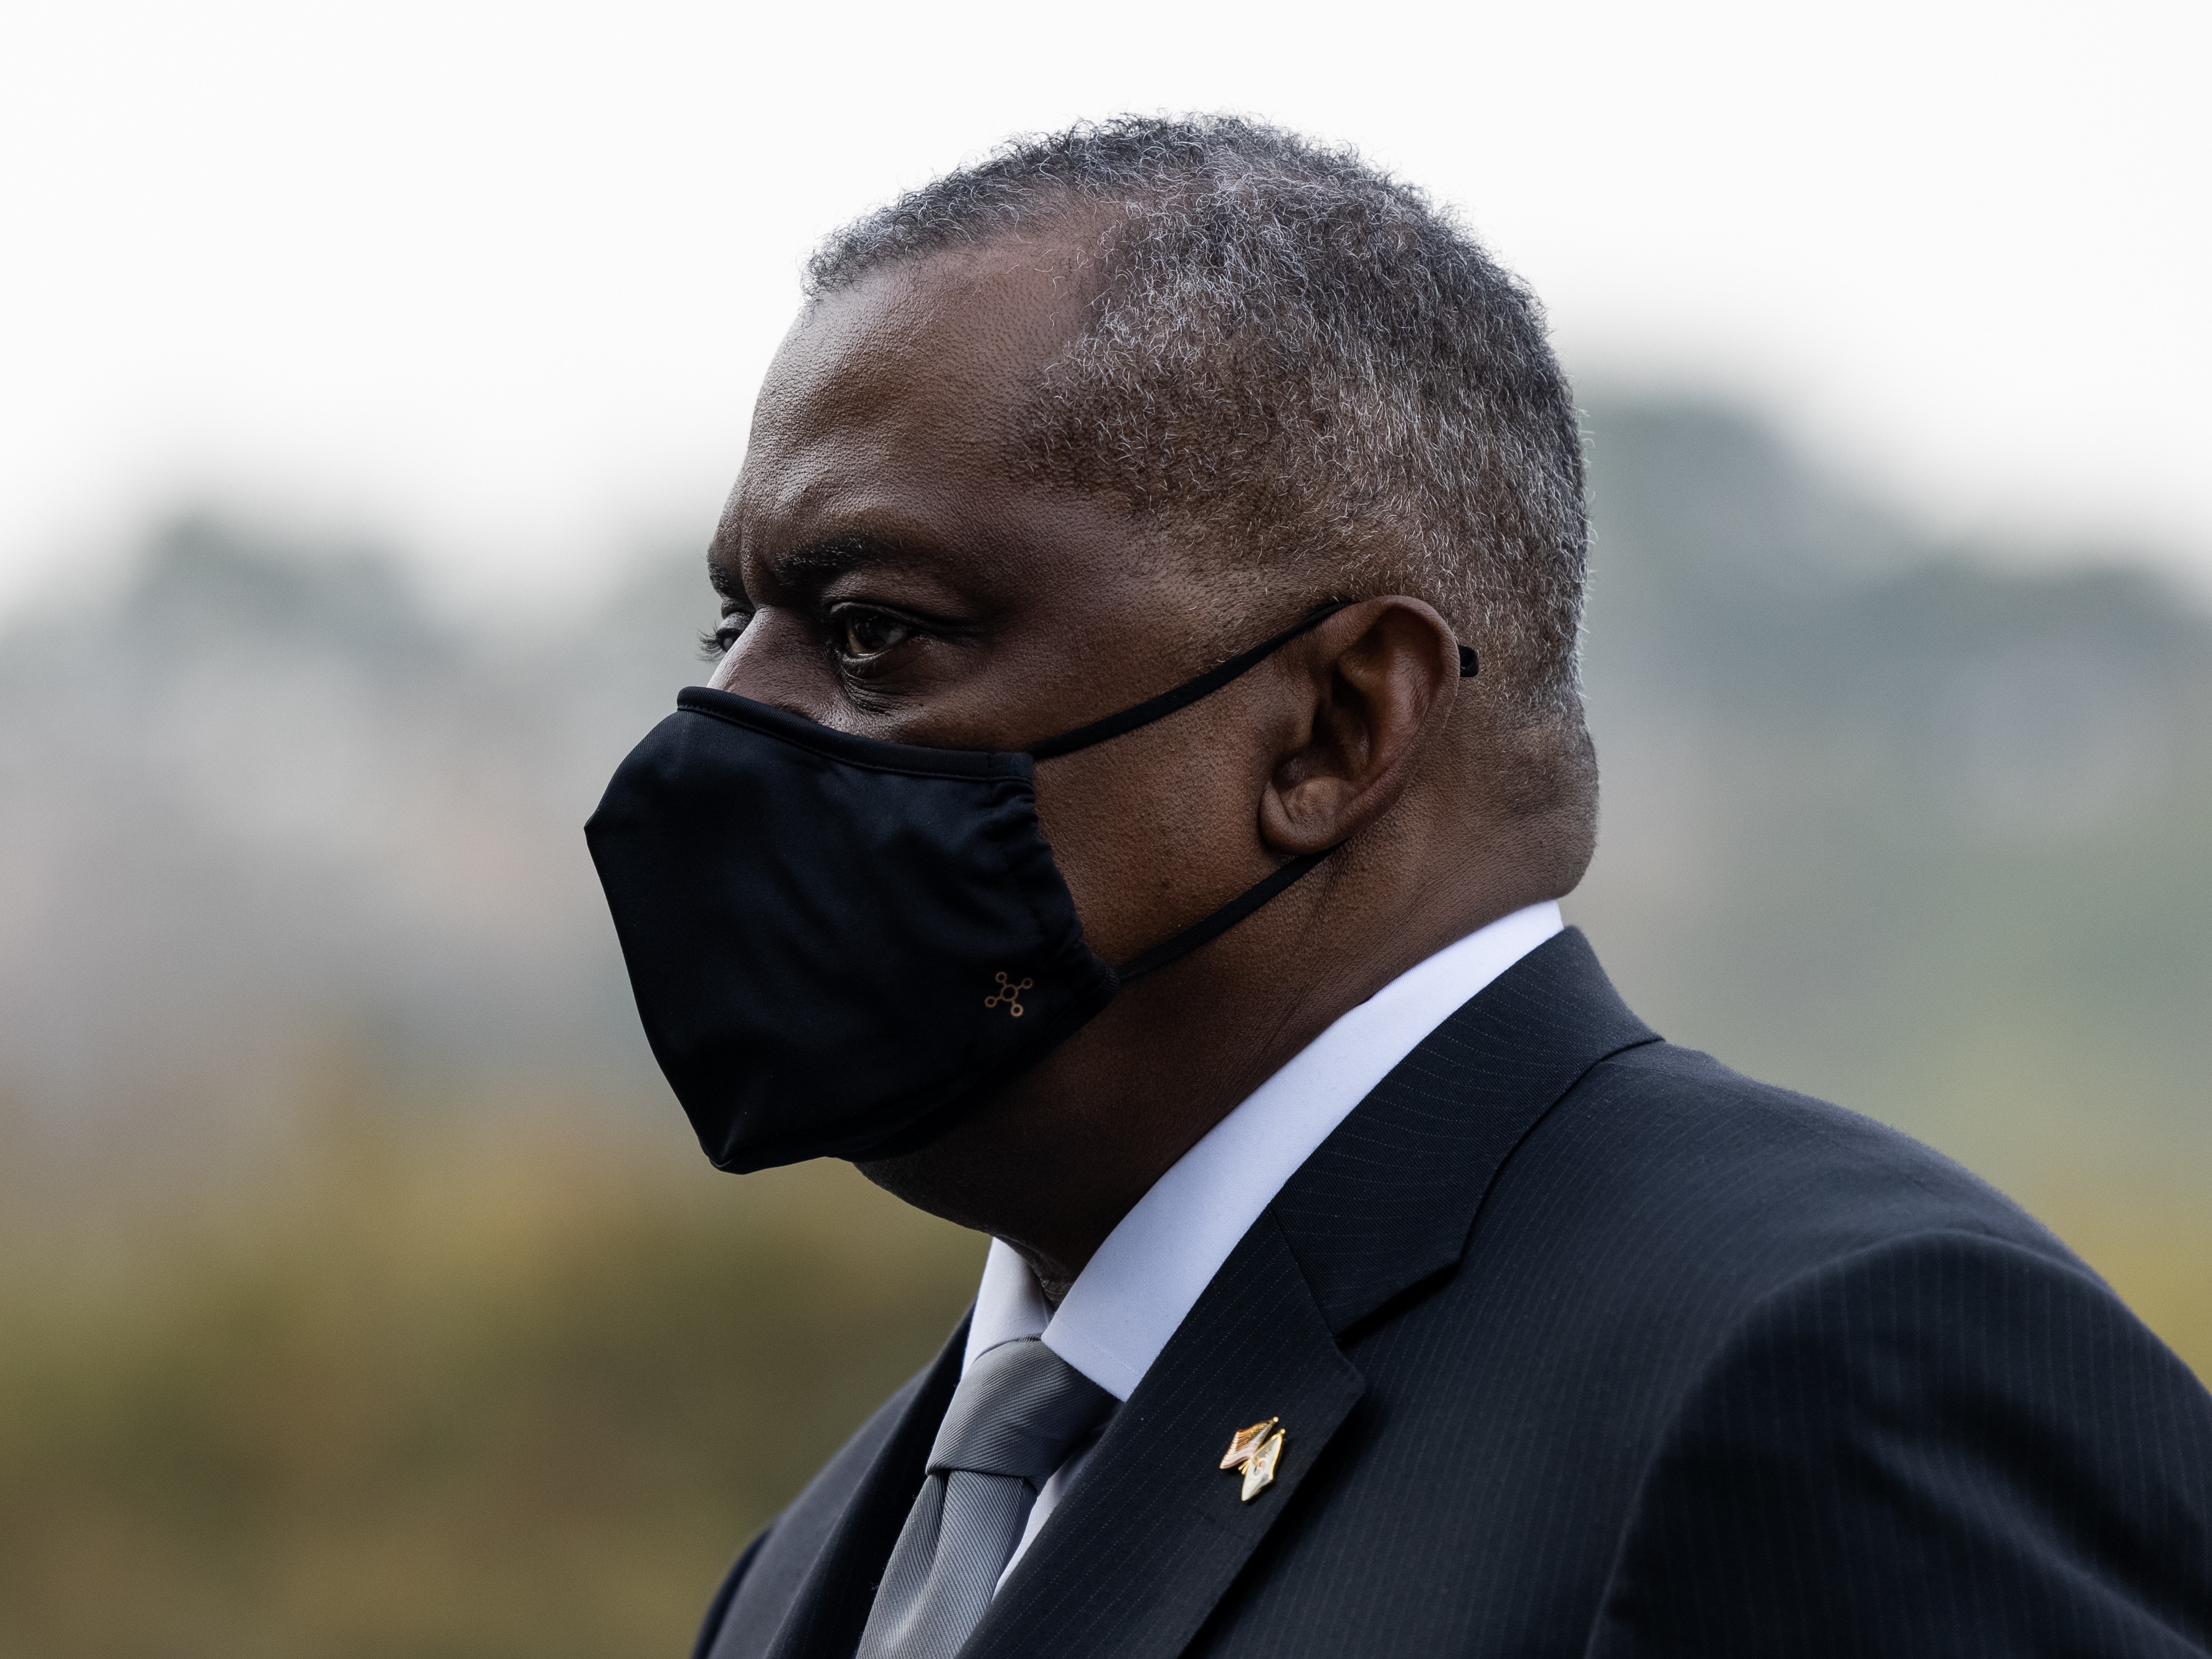 Lloyd Austin, U.S. secretary of defense, visits the National Cemetery in Seoul, South Korea, on Thursday. On his Asia tour, the defense chief made an unannounced visit to Afghanistan. CREDIT: SeongJoon Cho/Bloomberg via Getty Images